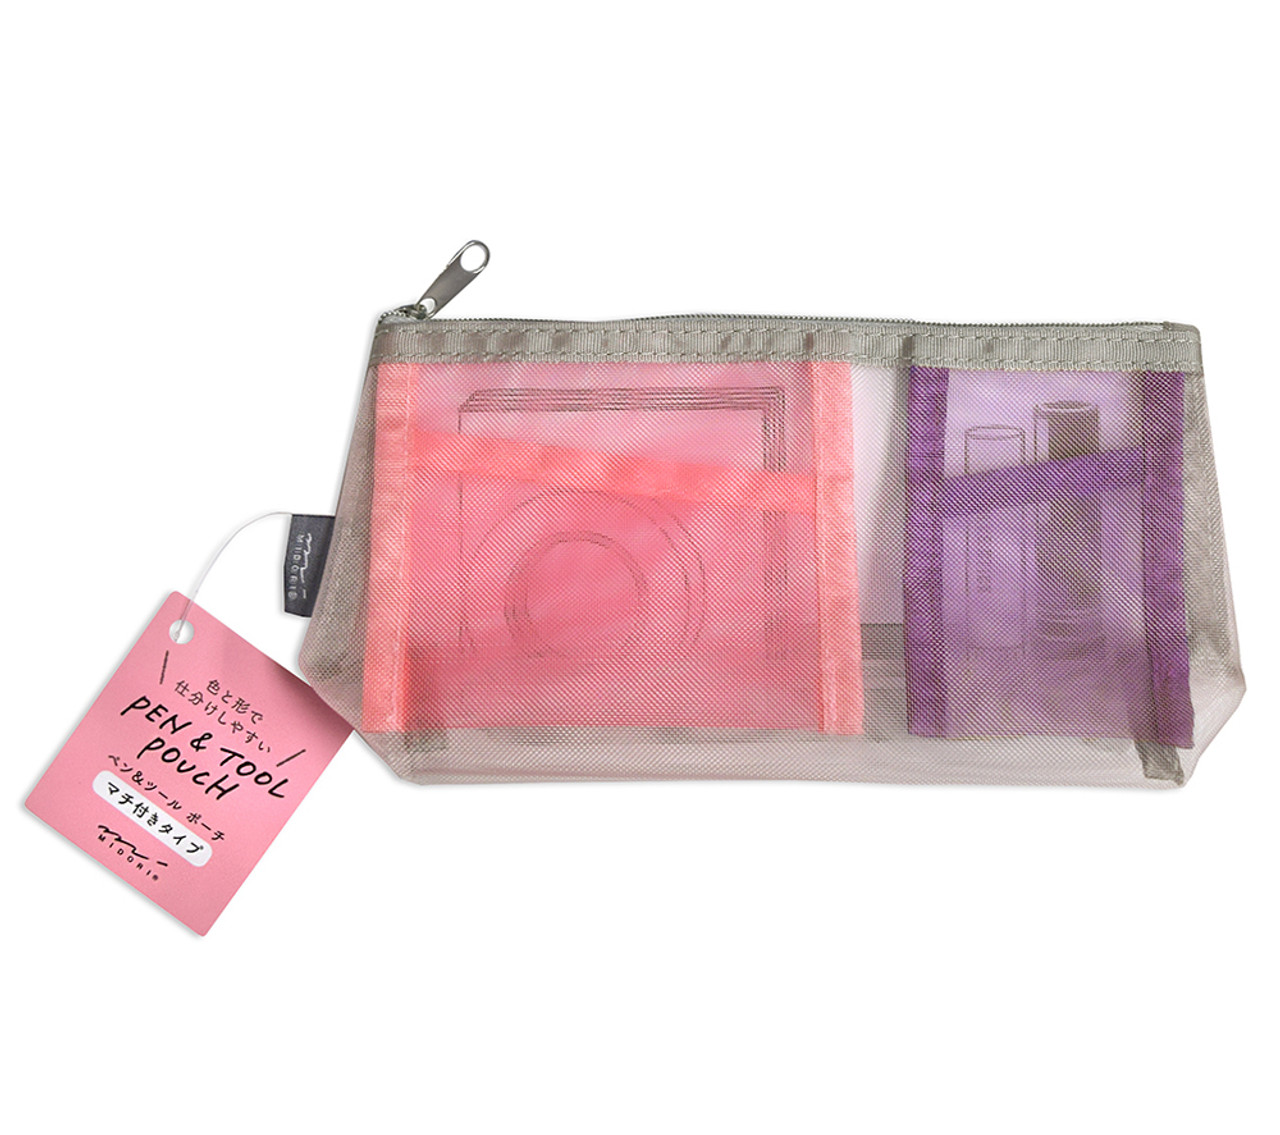 https://cdn11.bigcommerce.com/s-caae1tt33v/images/stencil/1280x1280/products/4857/10441/MidoriToolPouch-Small-Pink-web__72789.1692303503.jpg?c=1